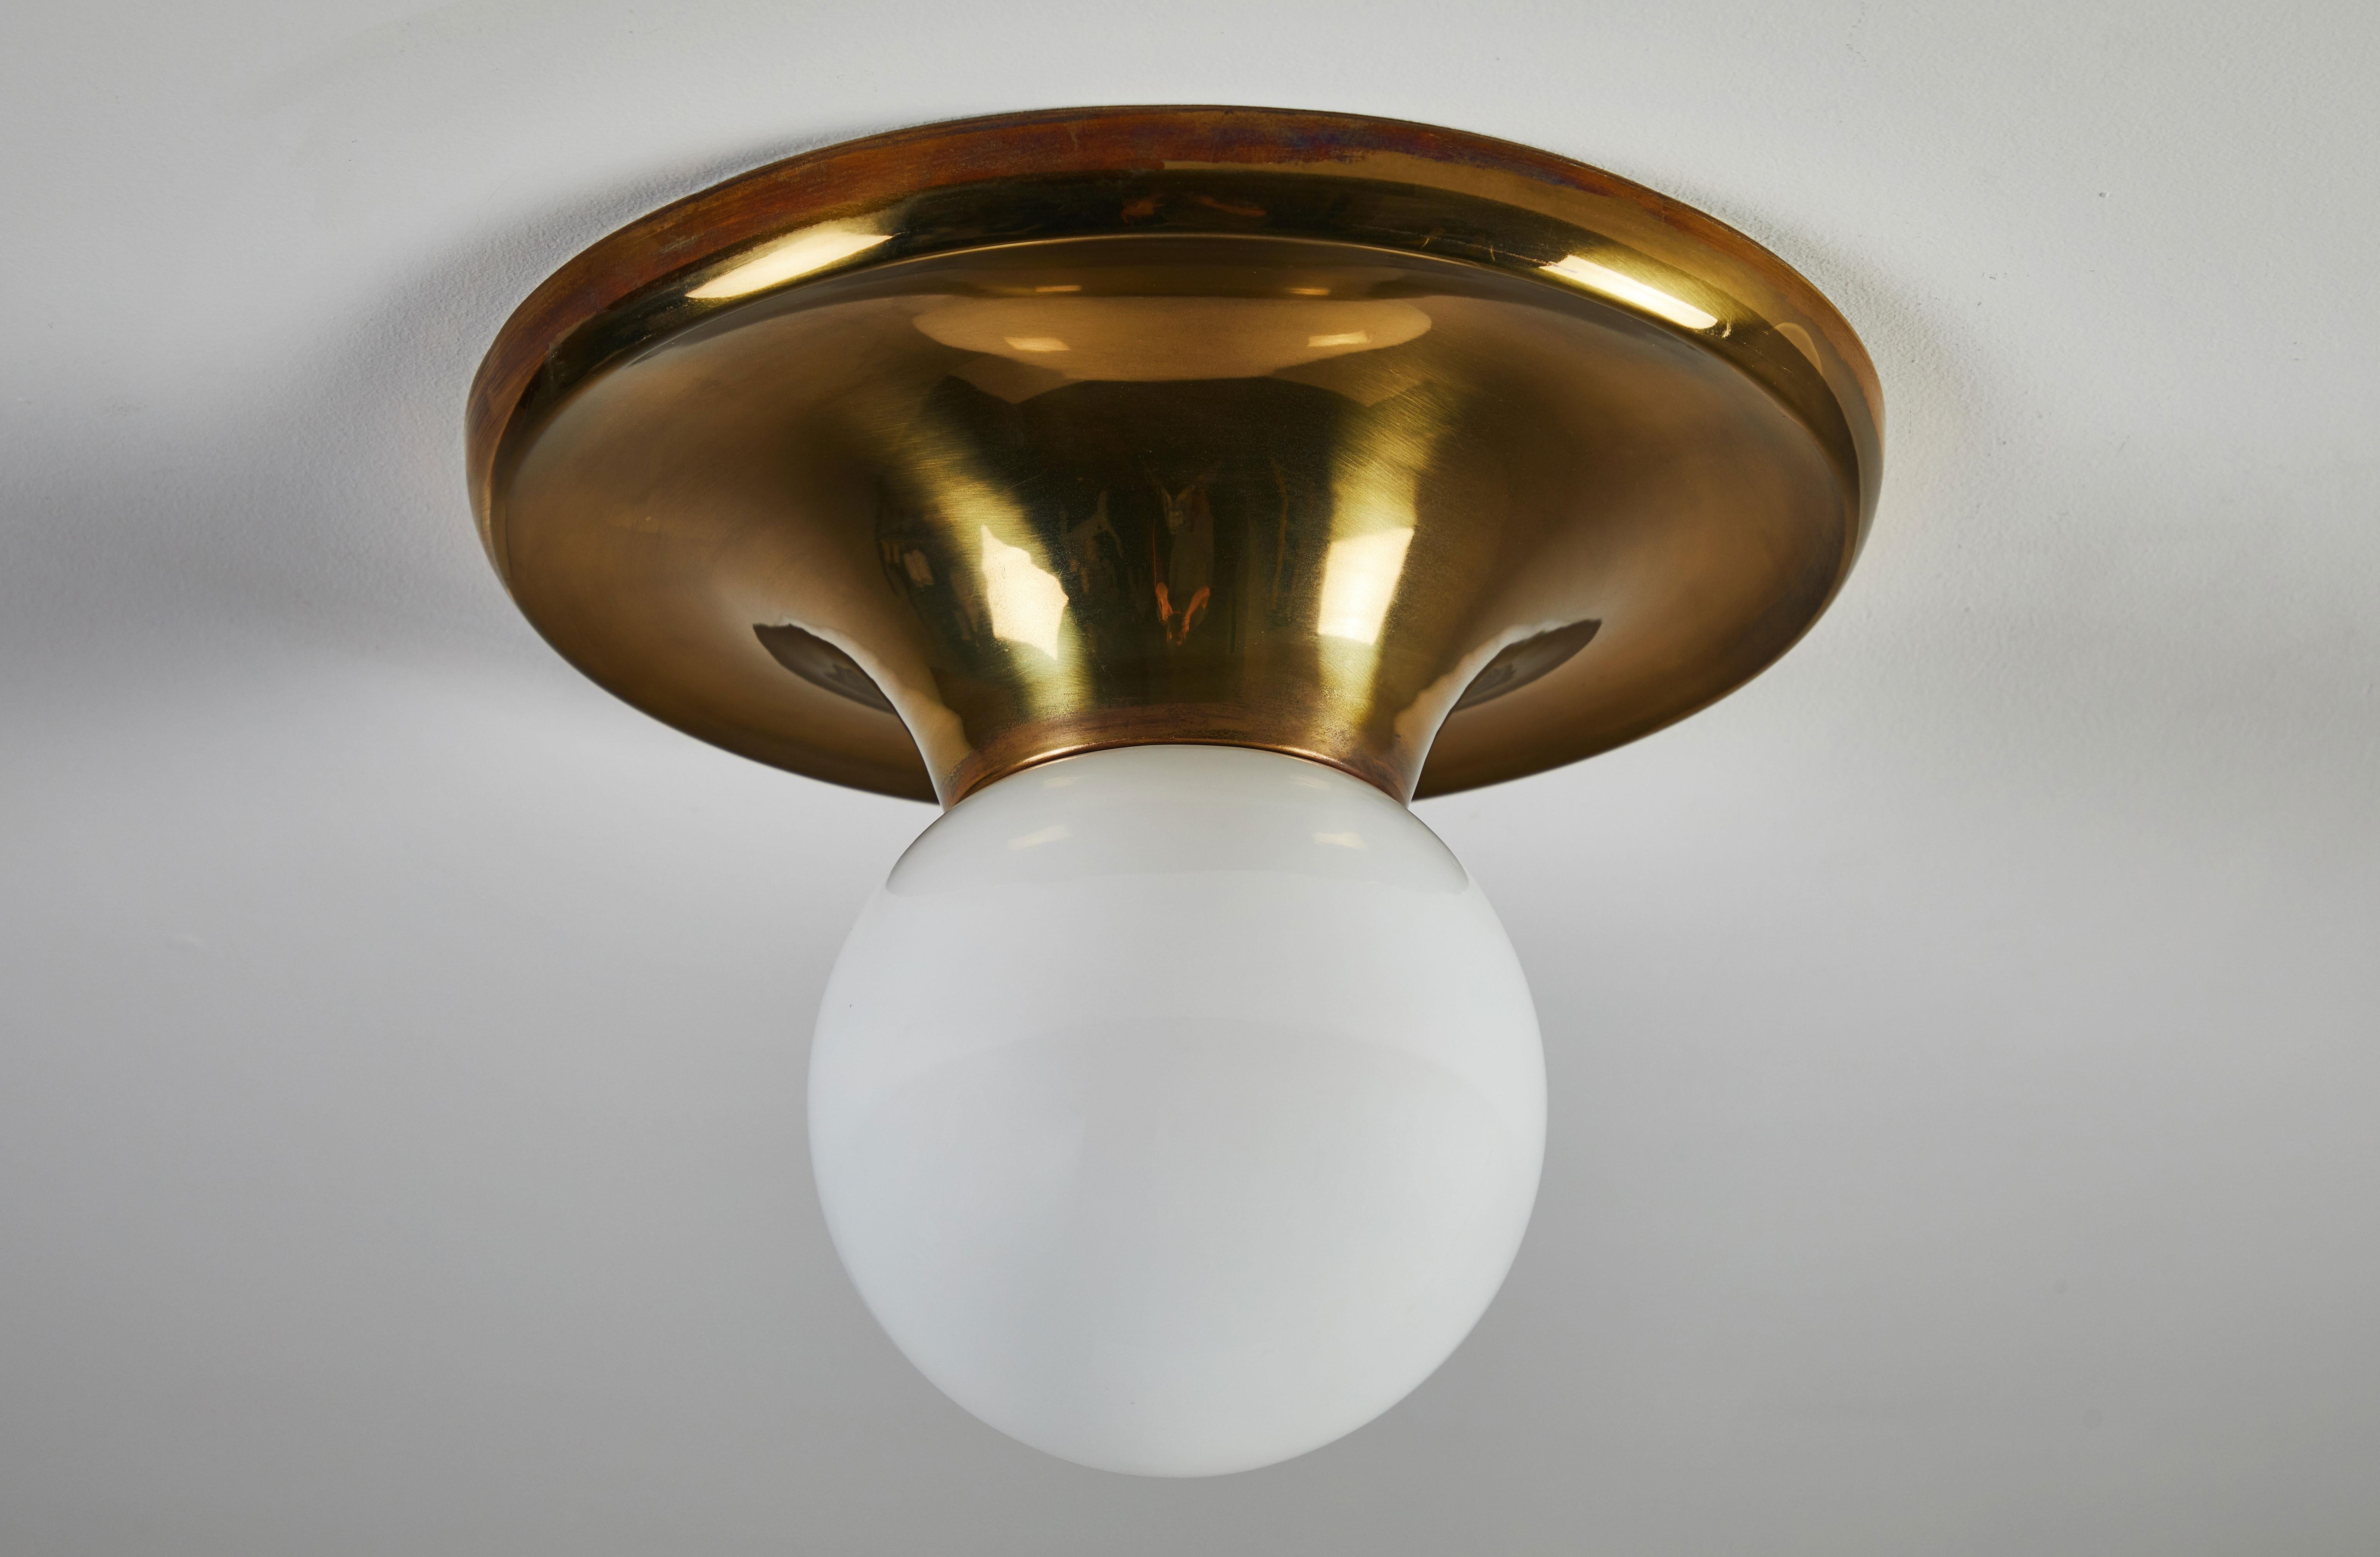 Single flush mount ceiling light by Achille & Pier Giacomo Castiglioni for Flos. Designed and manufactured in Italy, 1965. Brass and opaline glass. Rewired for US junction boxes. Each light takes one E27 100w maximum bulb. Literature: Casa Amica